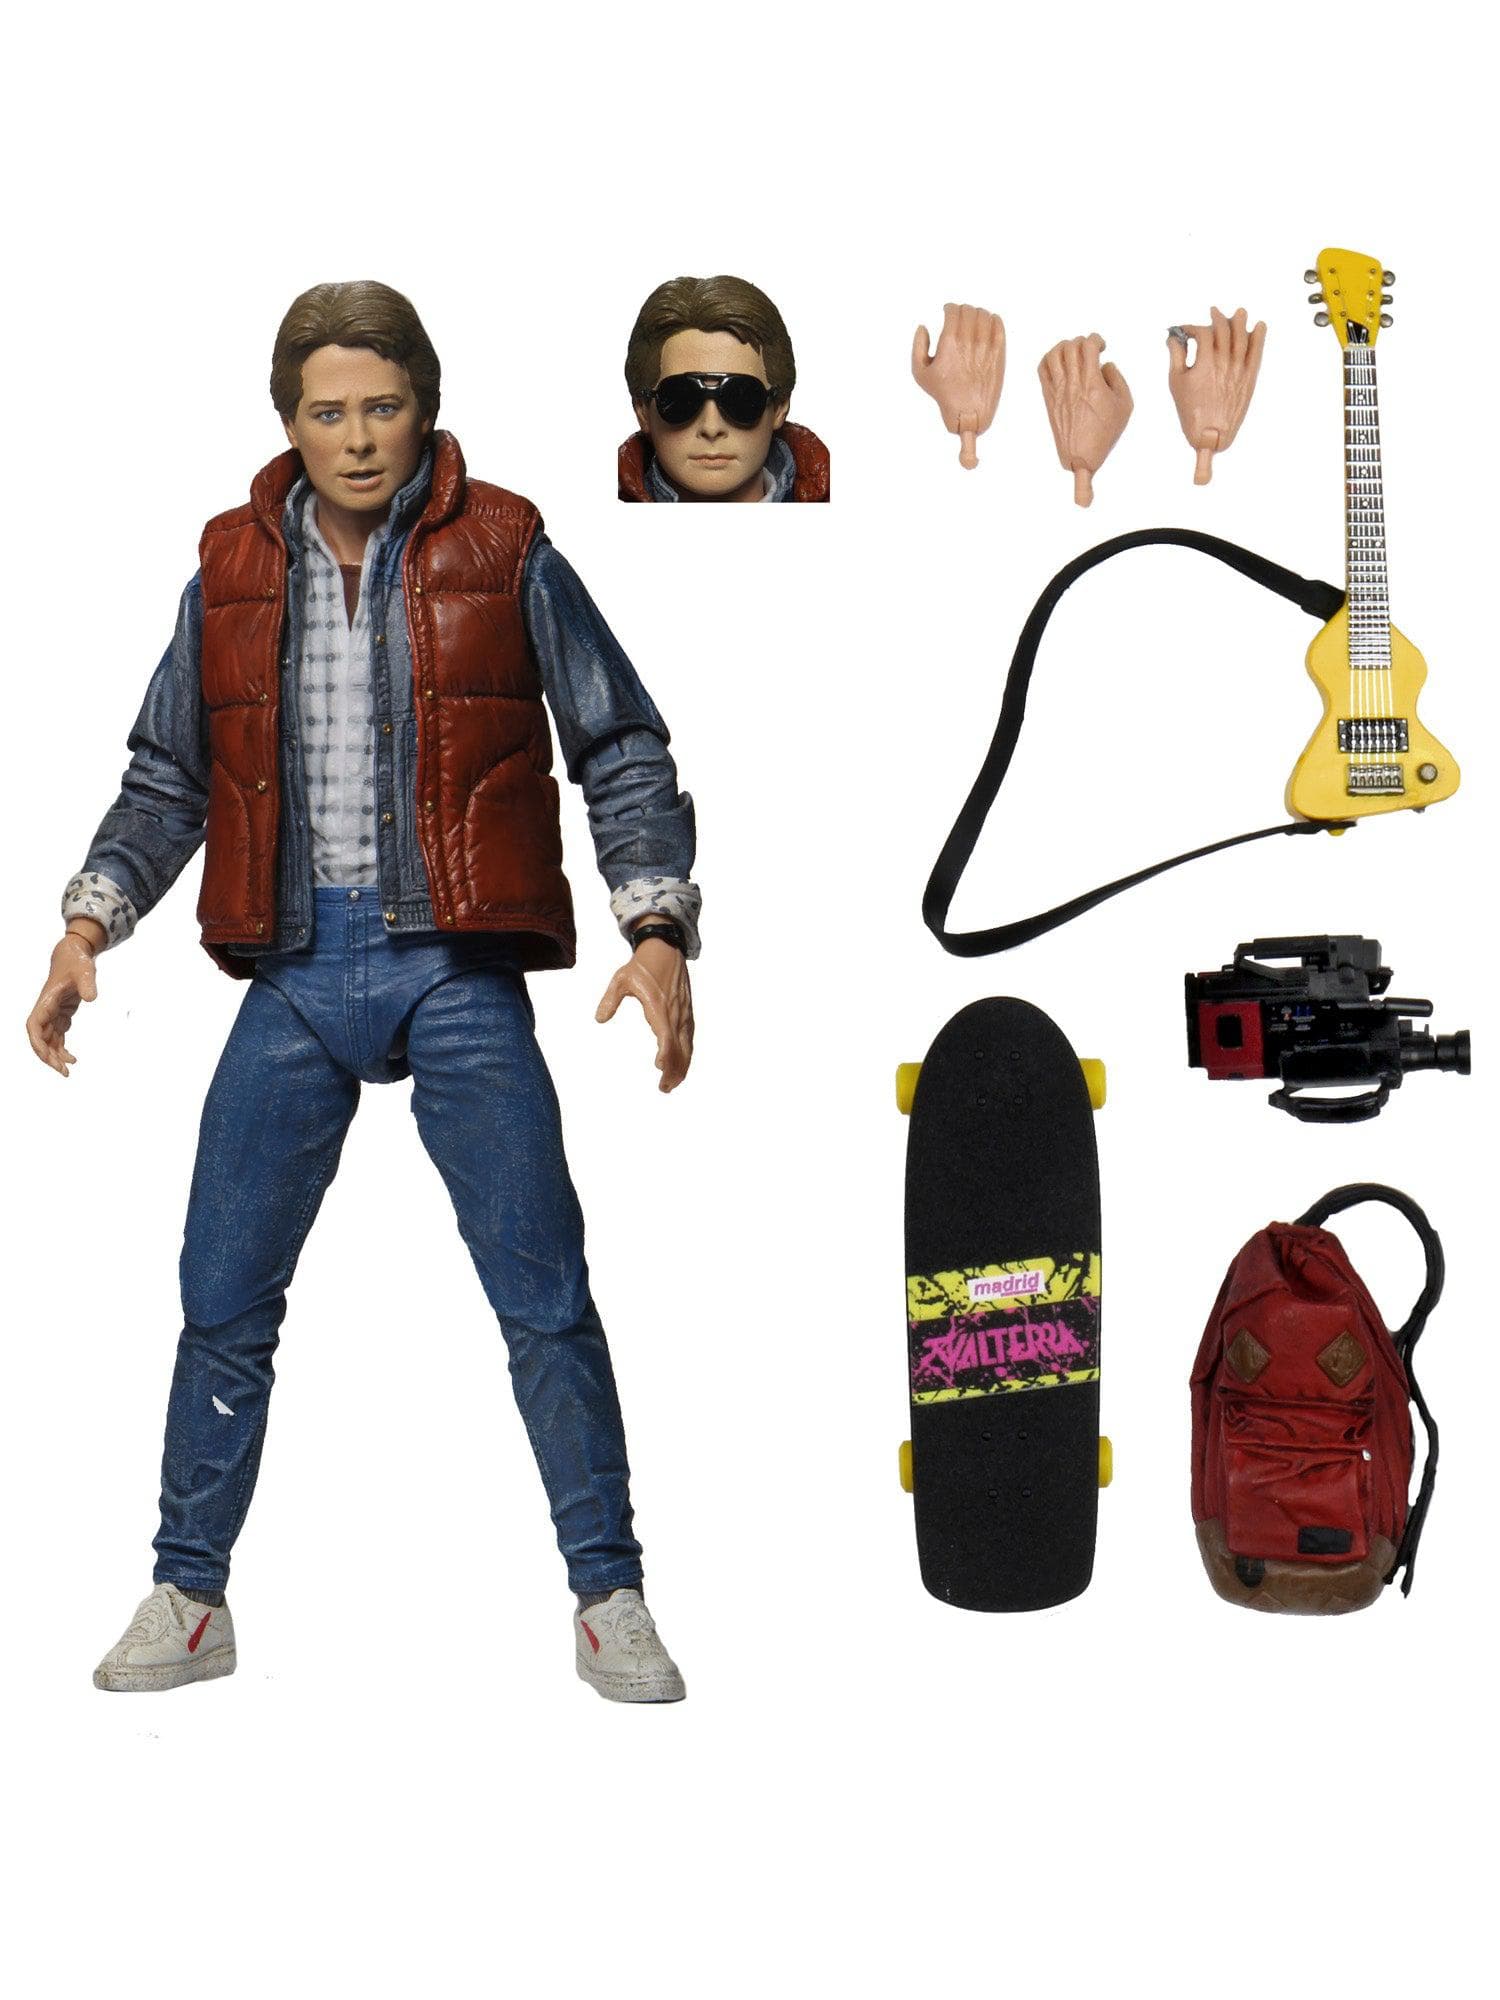 NECA - Back to the Future - 7" Action Figure - Ultimate Marty - costumes.com